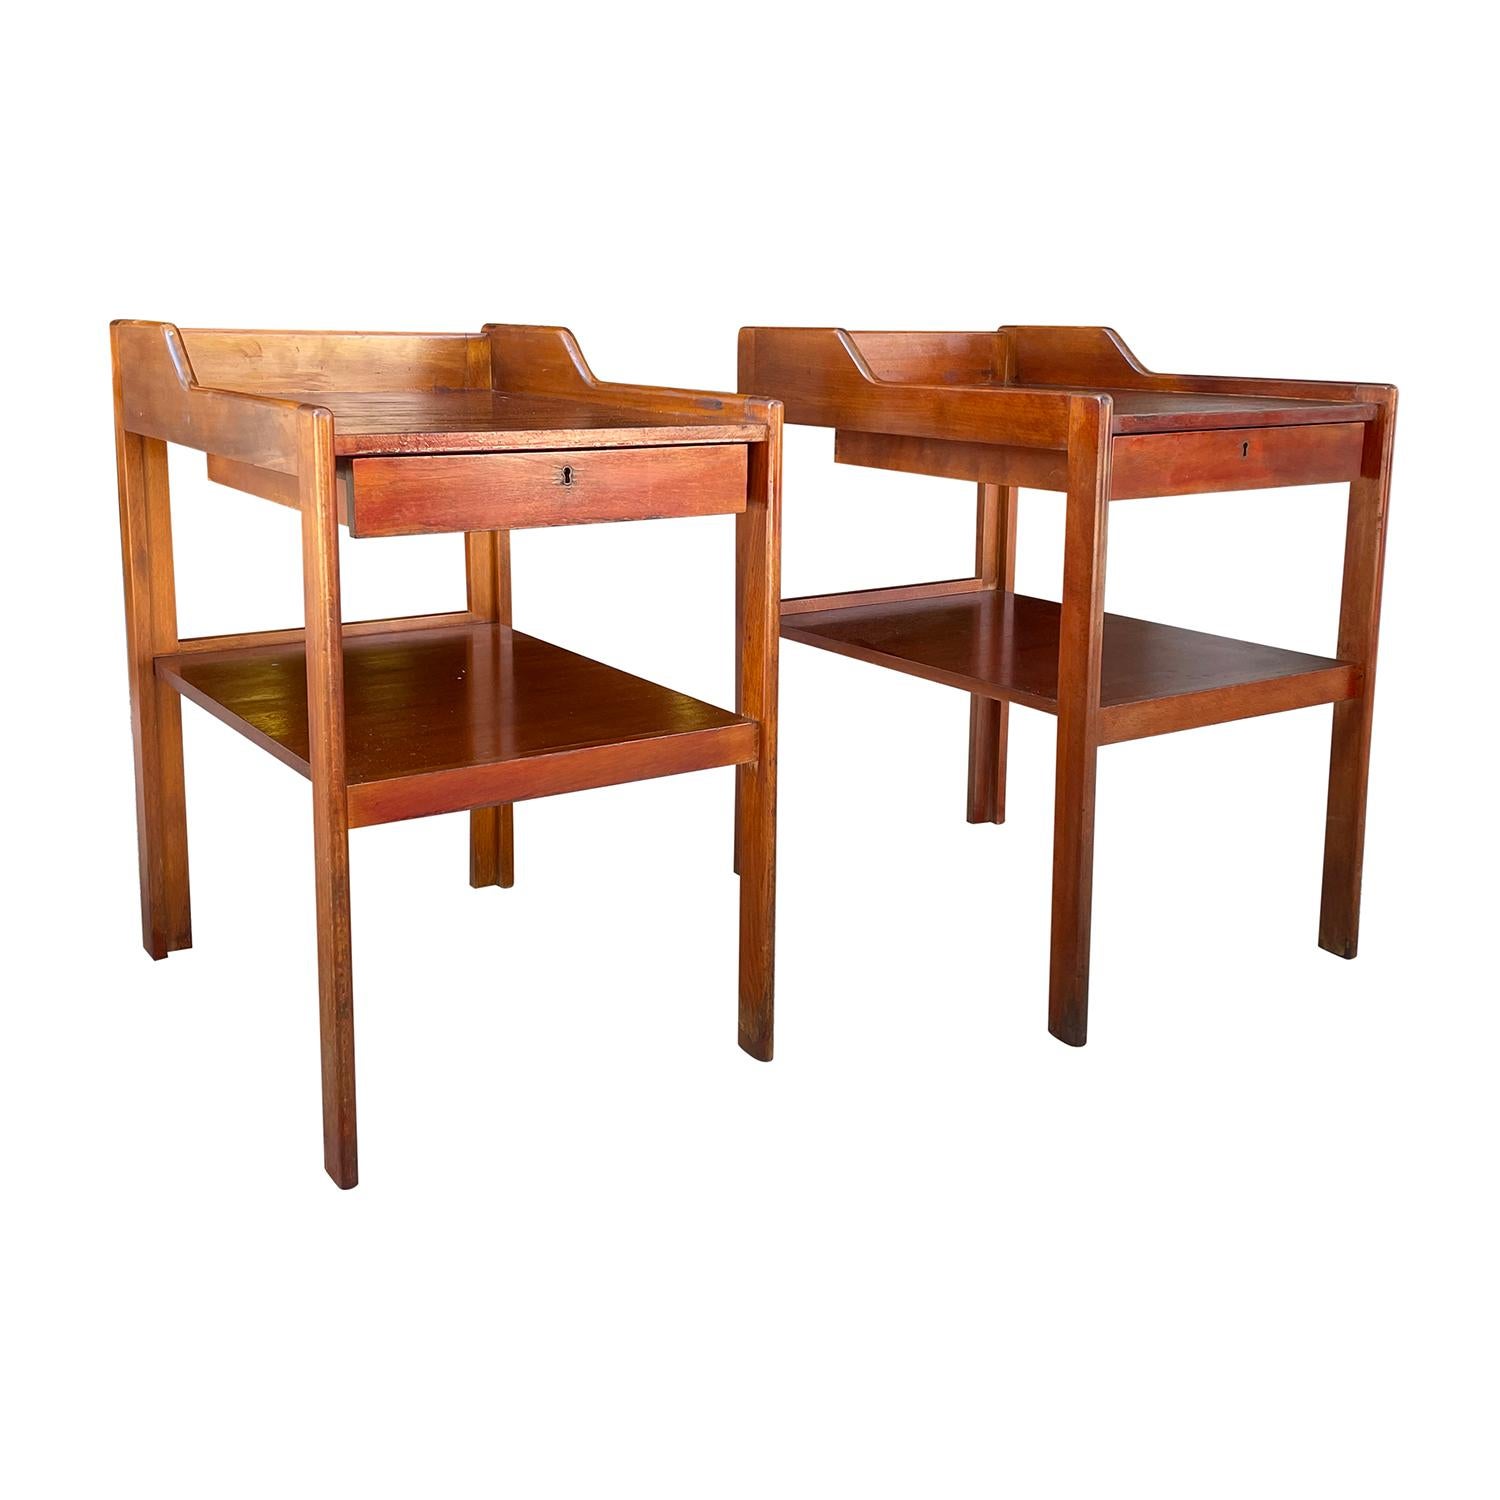 Metal 20th Century Swedish Mahogany Nightstands, Bedside Tables by Carl-Axel Acking